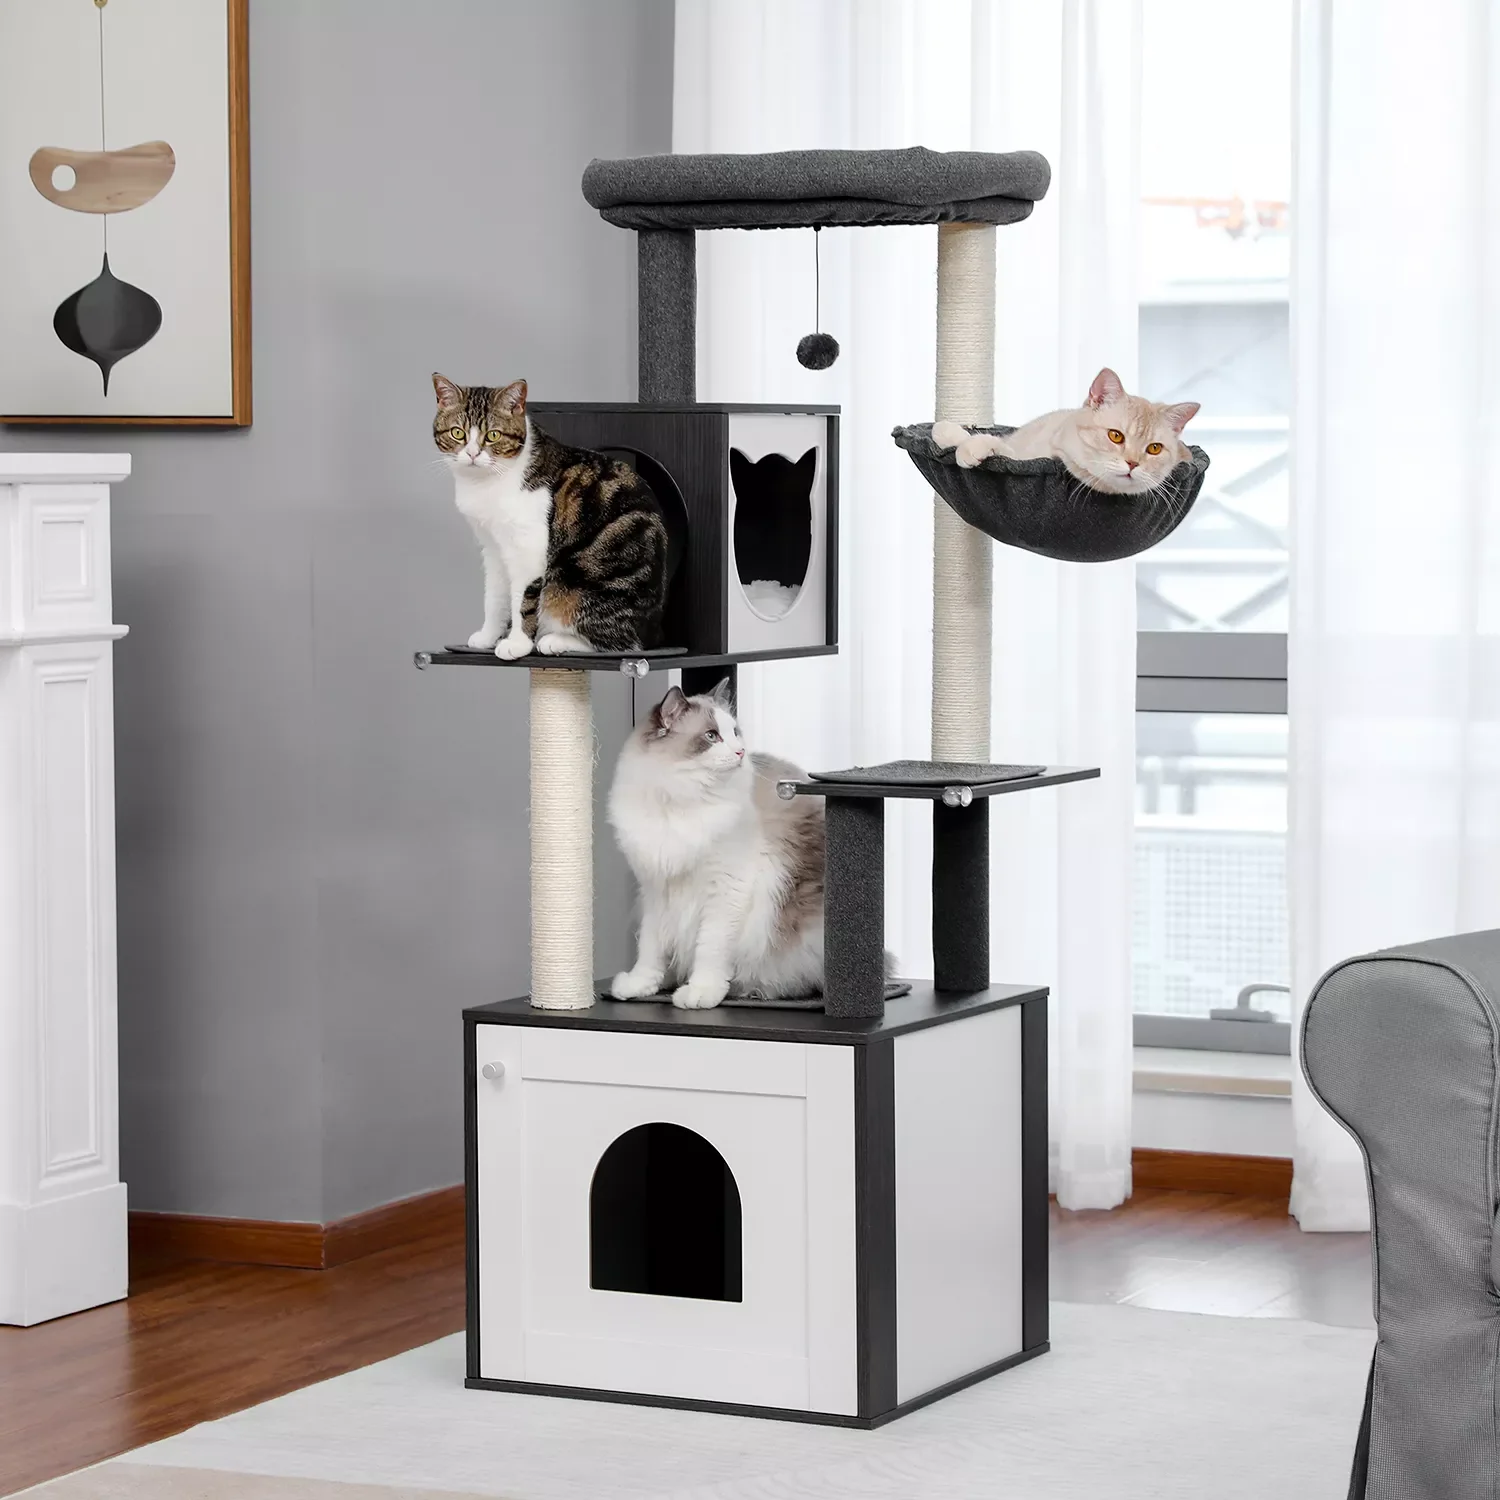 

Modern Cat Tree Wood Cat Tower with Storage Cabinet Litter Box Enclosure and Spacious Cat Condo, Large Top Perch and Hammock